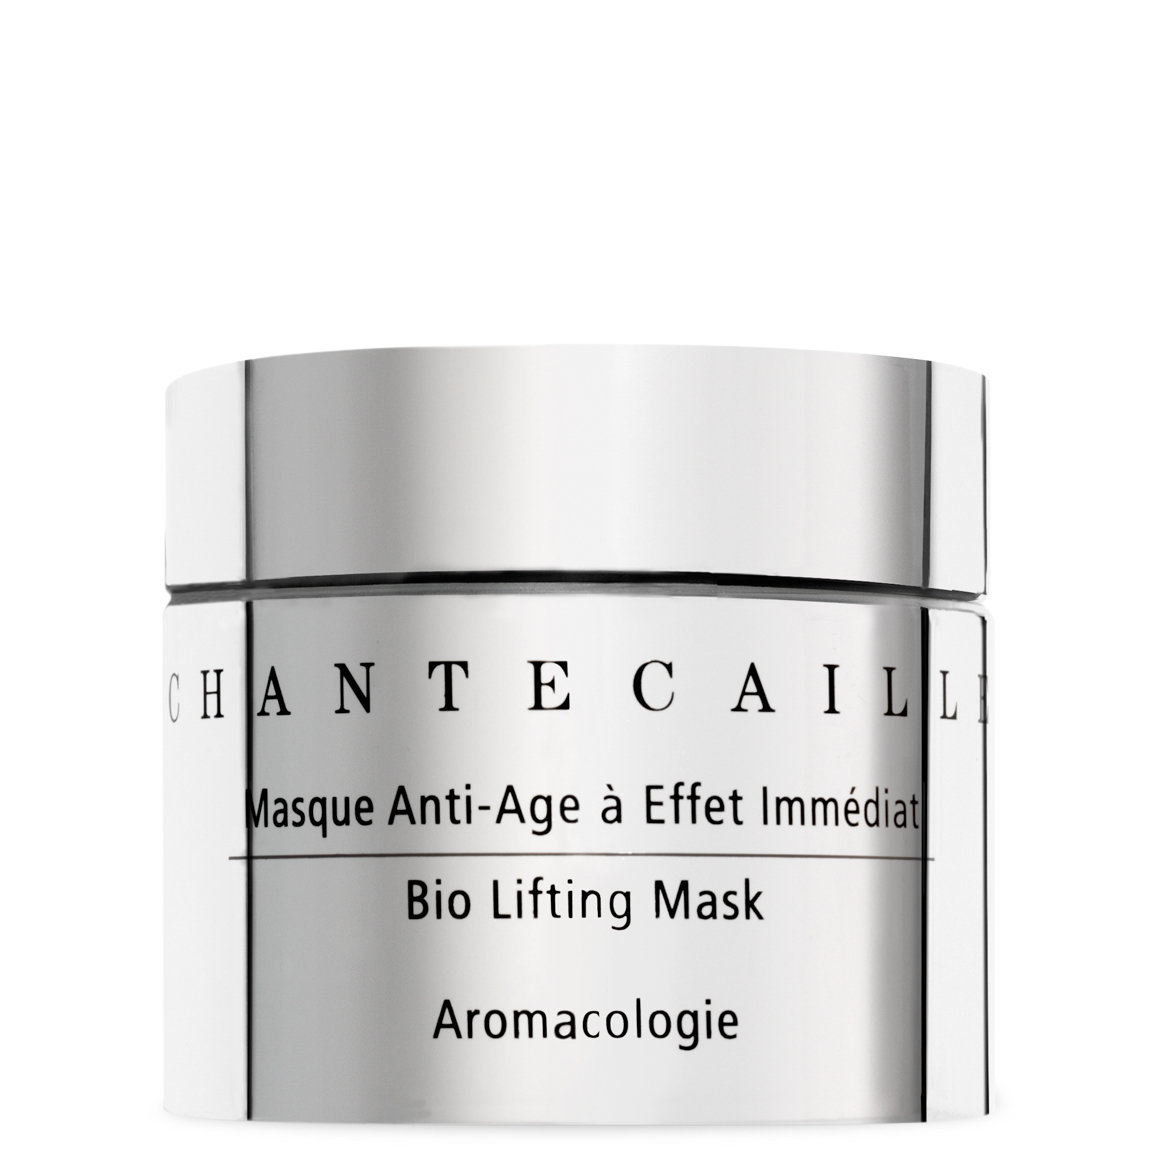 Chantecaille Bio Lifting Mask 50 ml alternative view 1 - product swatch.